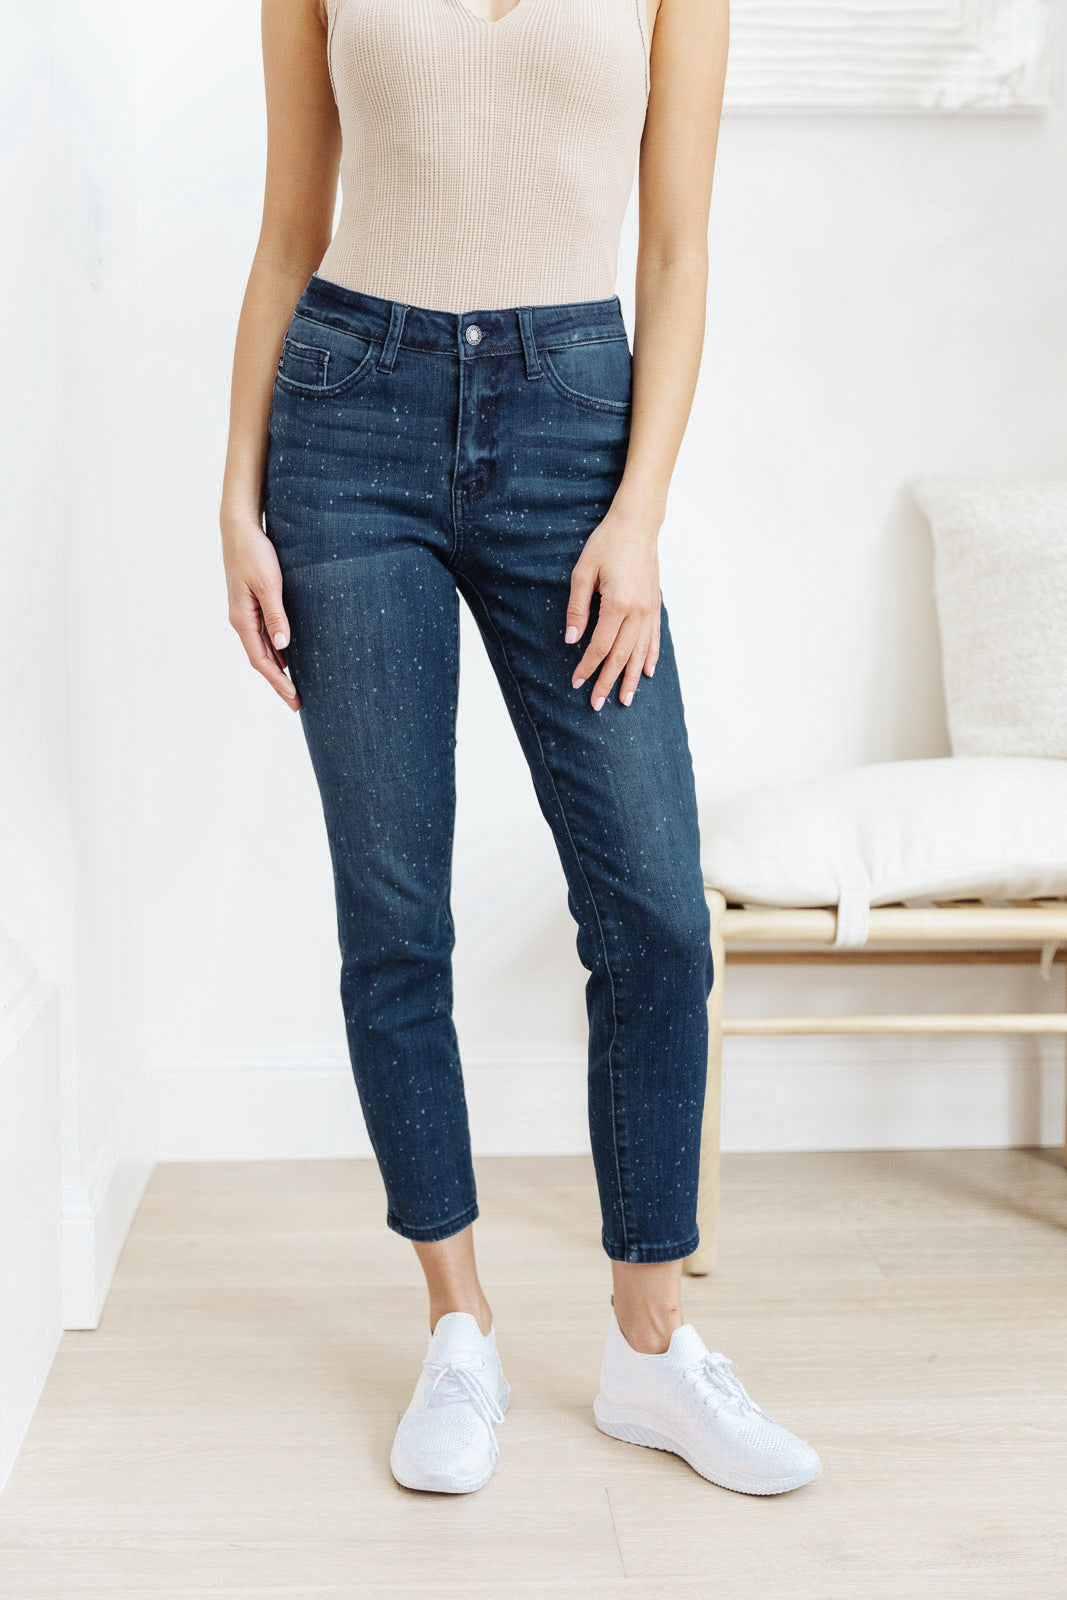 Judy Blue Final Sale: Mid-Rise Relaxed Fit Mineral Wash Jeans by Judy Blue